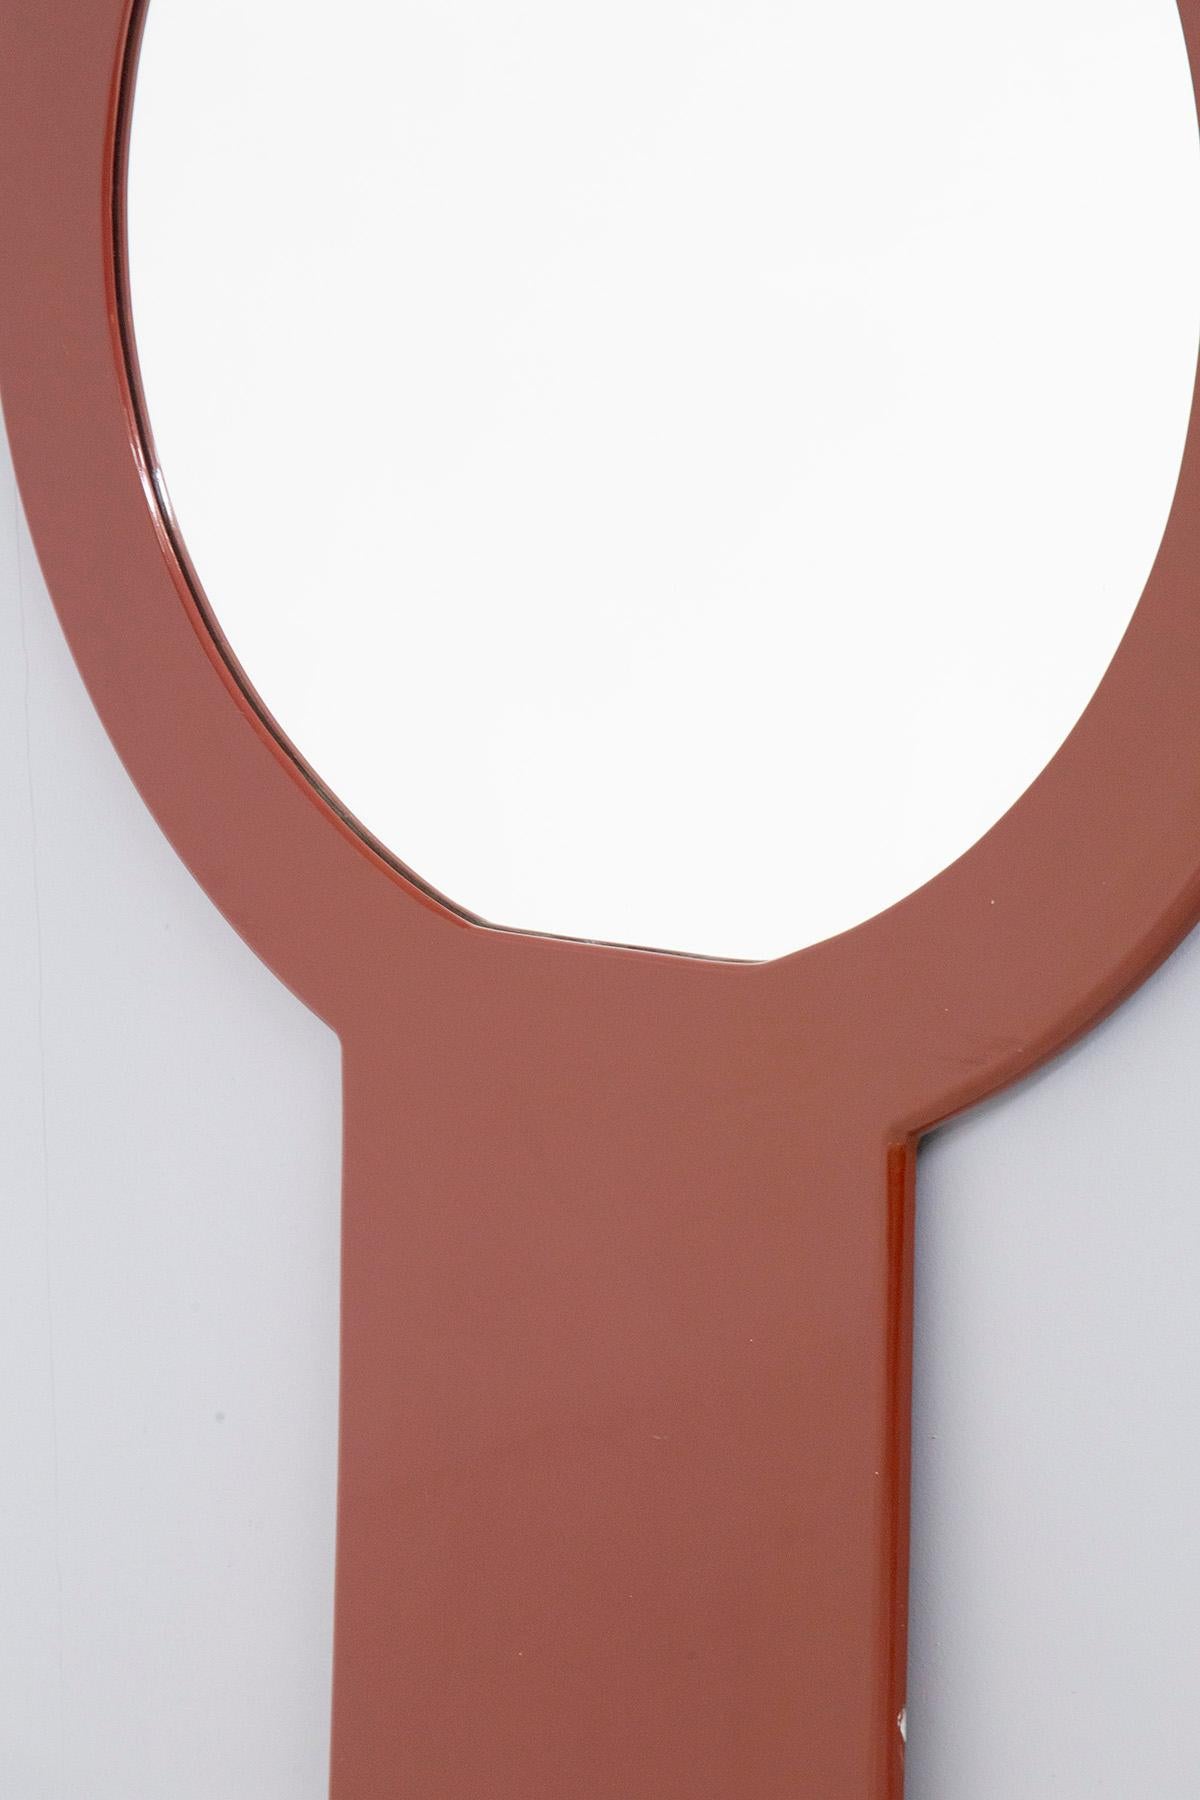 Late 20th Century Italian Space Age Wall Mirror by F.Lli Sbrilli in Red Lacquered Wood